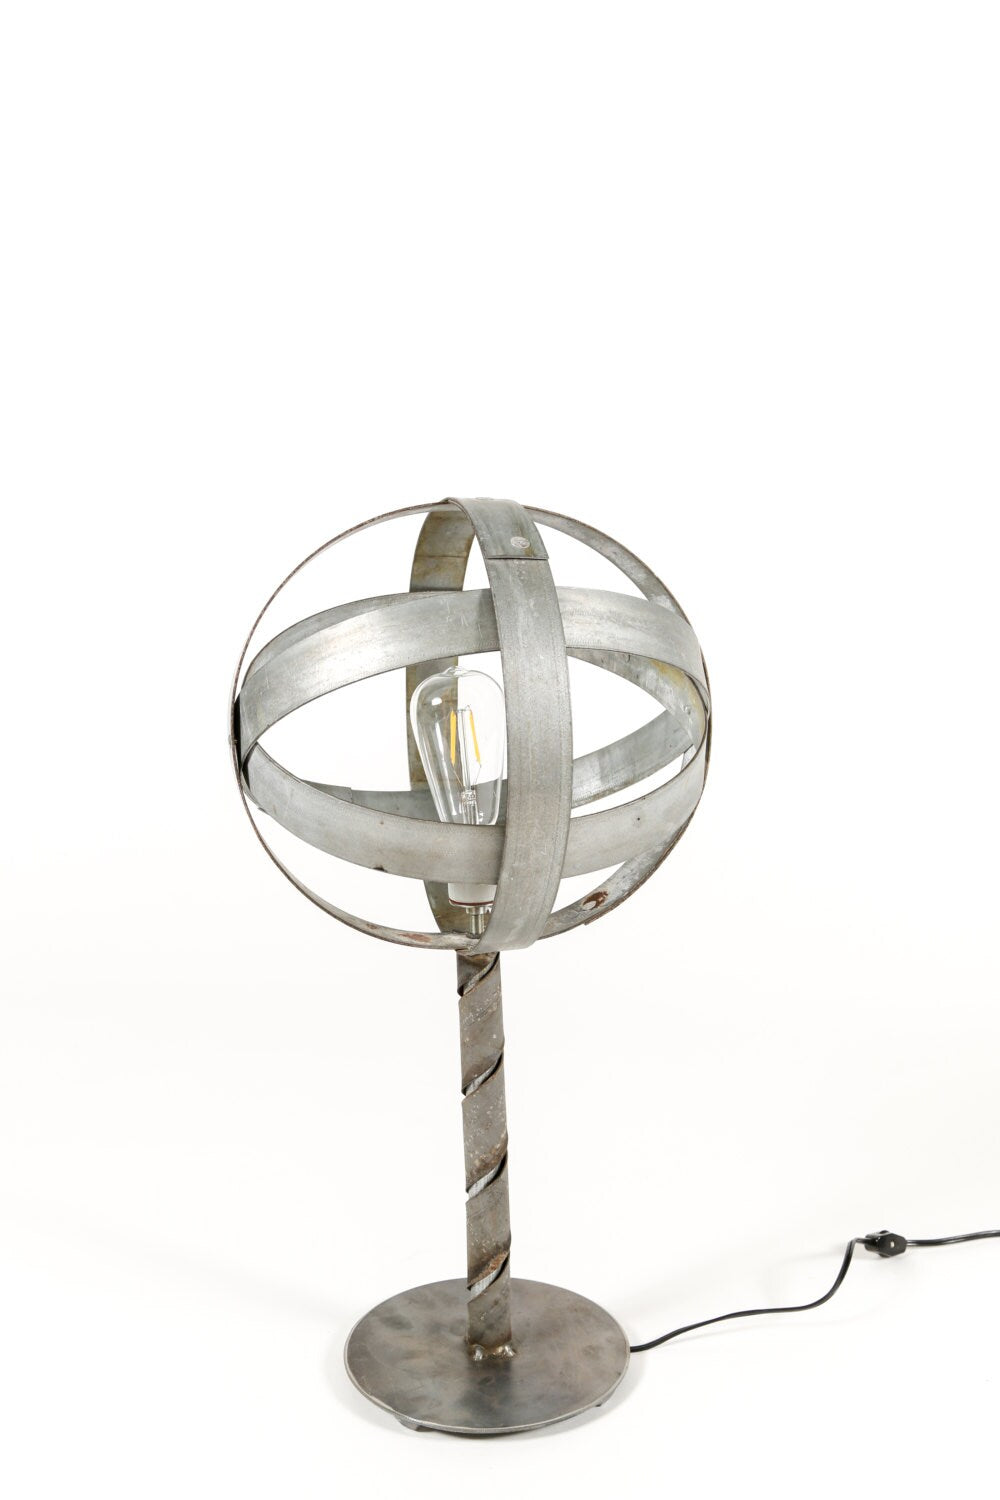 Wine Barrel Desk Lamp - Tavoci - Made from retired California wine barrel rings. 100% Recycled!